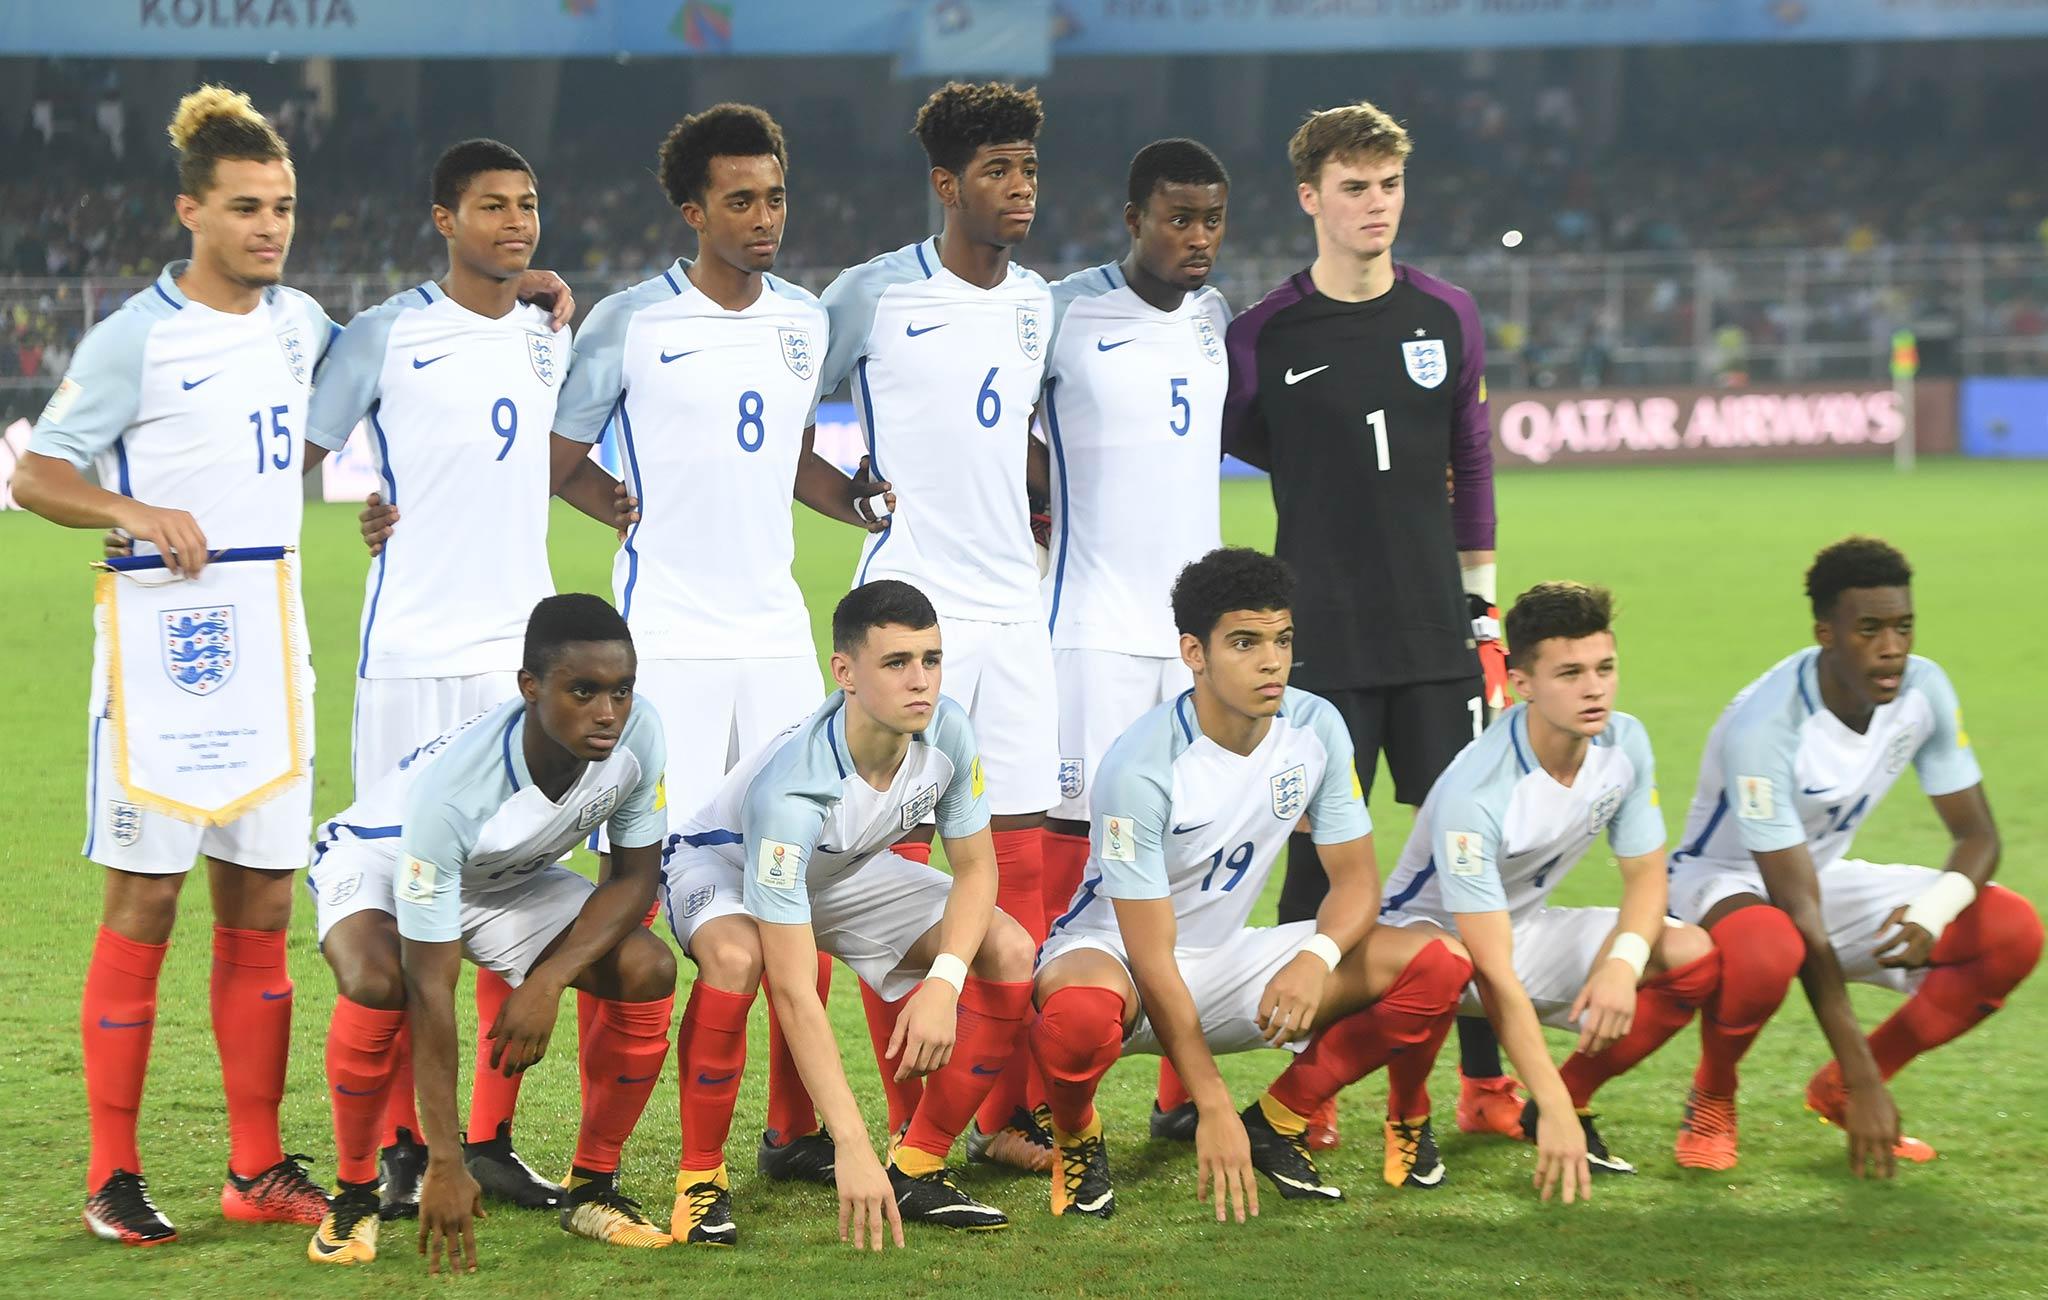 &#13;
England Under-17s will play either Mali or Spain in Saturday's final. (Getty)&#13;